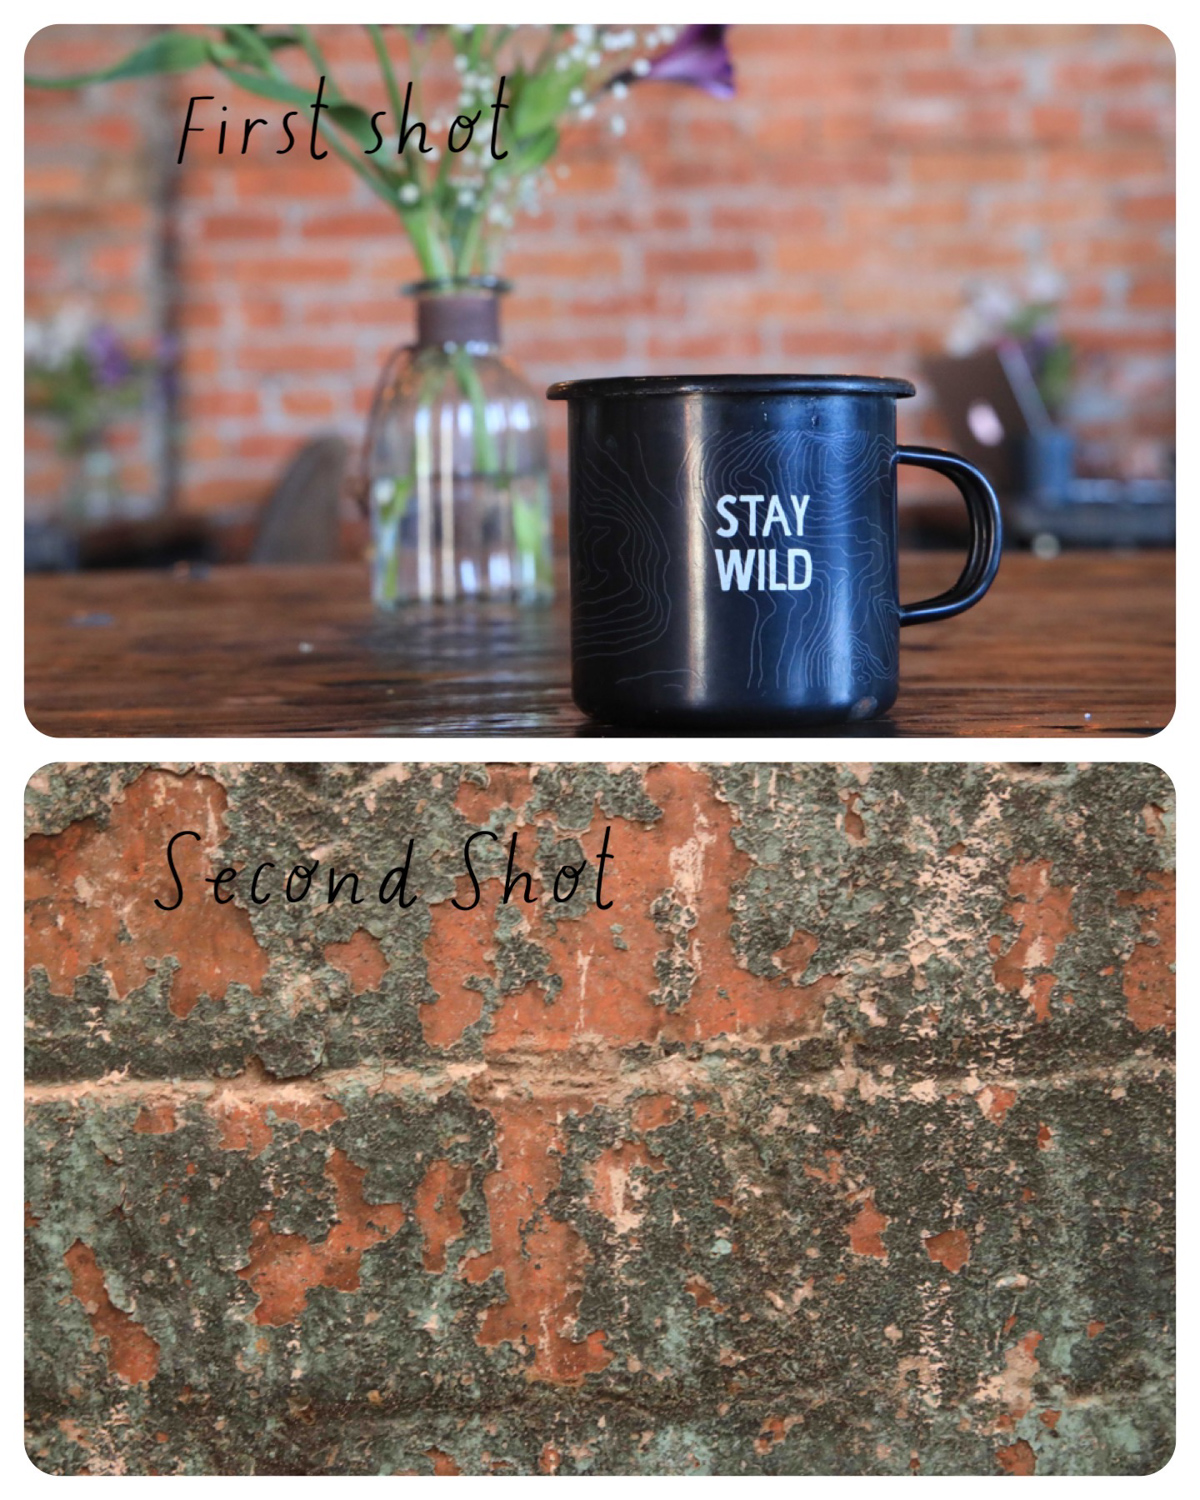 Blog-04-23-No.7.jpg brick and cup collage